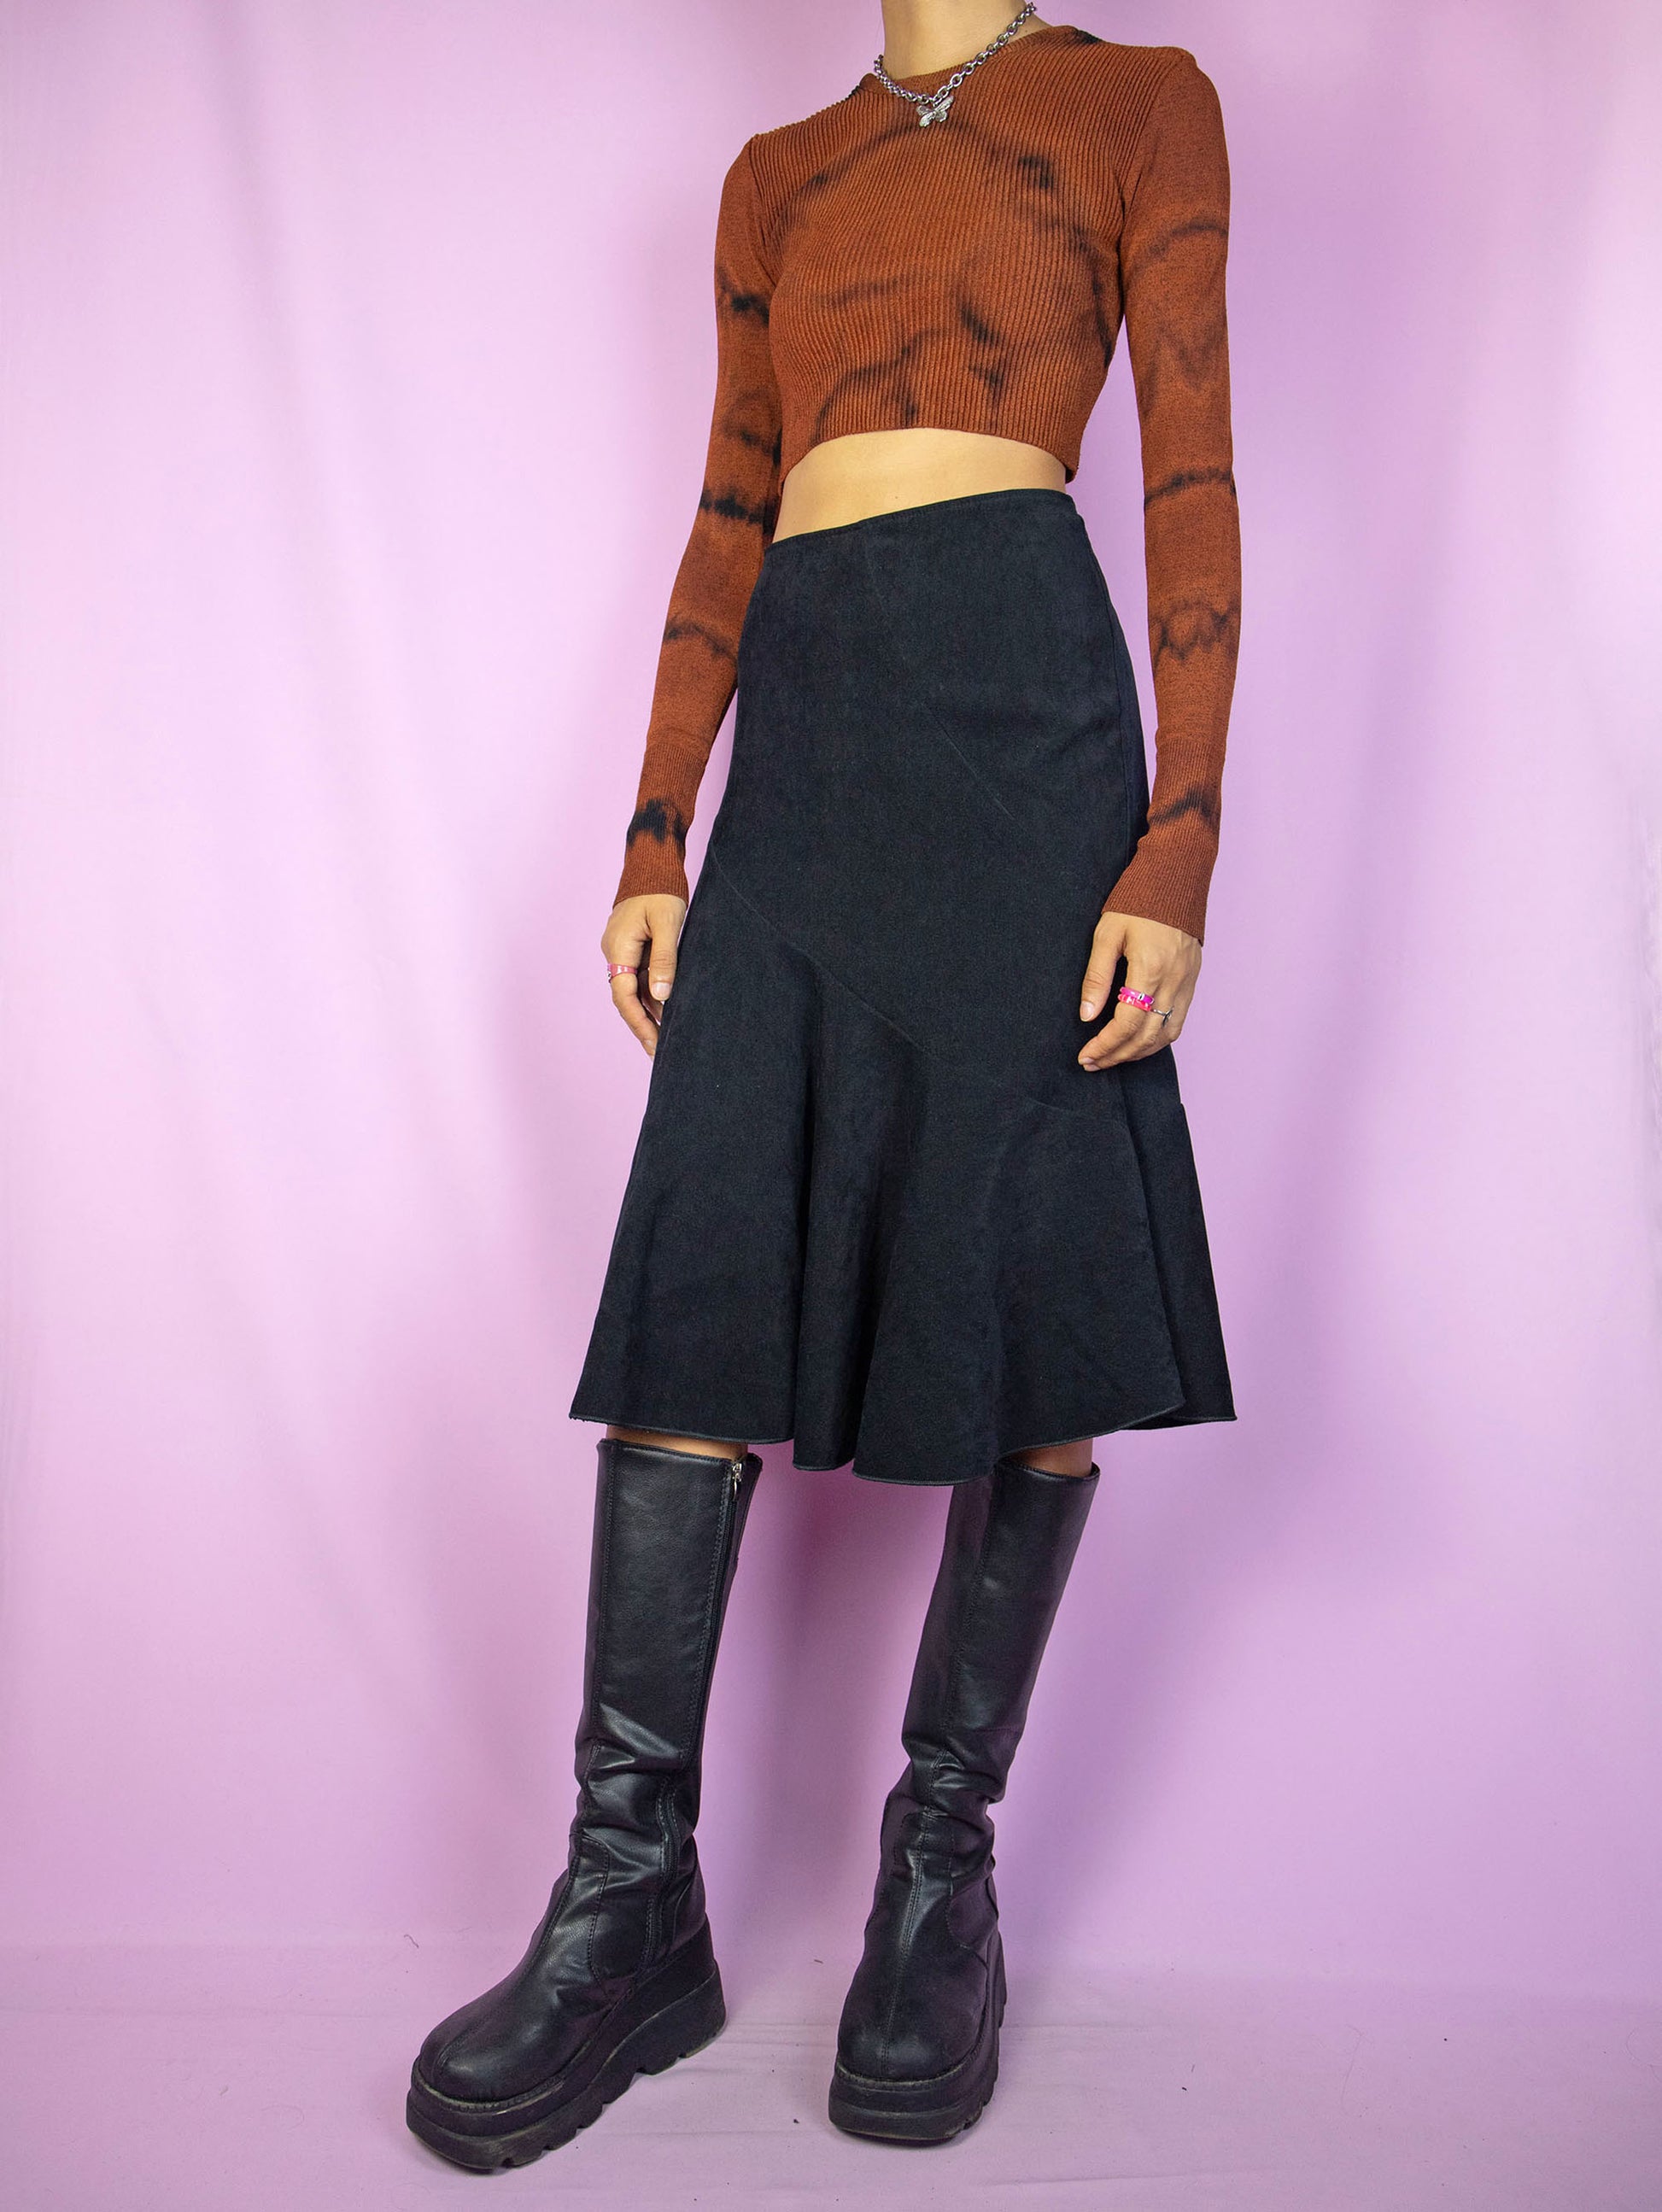 The Vintage 90's Black Trumpet Midi Skirt is a black faux suede skirt with a flared hem and a back zipper closure. A gorgeous and elegant dark fairy goth maxi skirt from the 1990s.